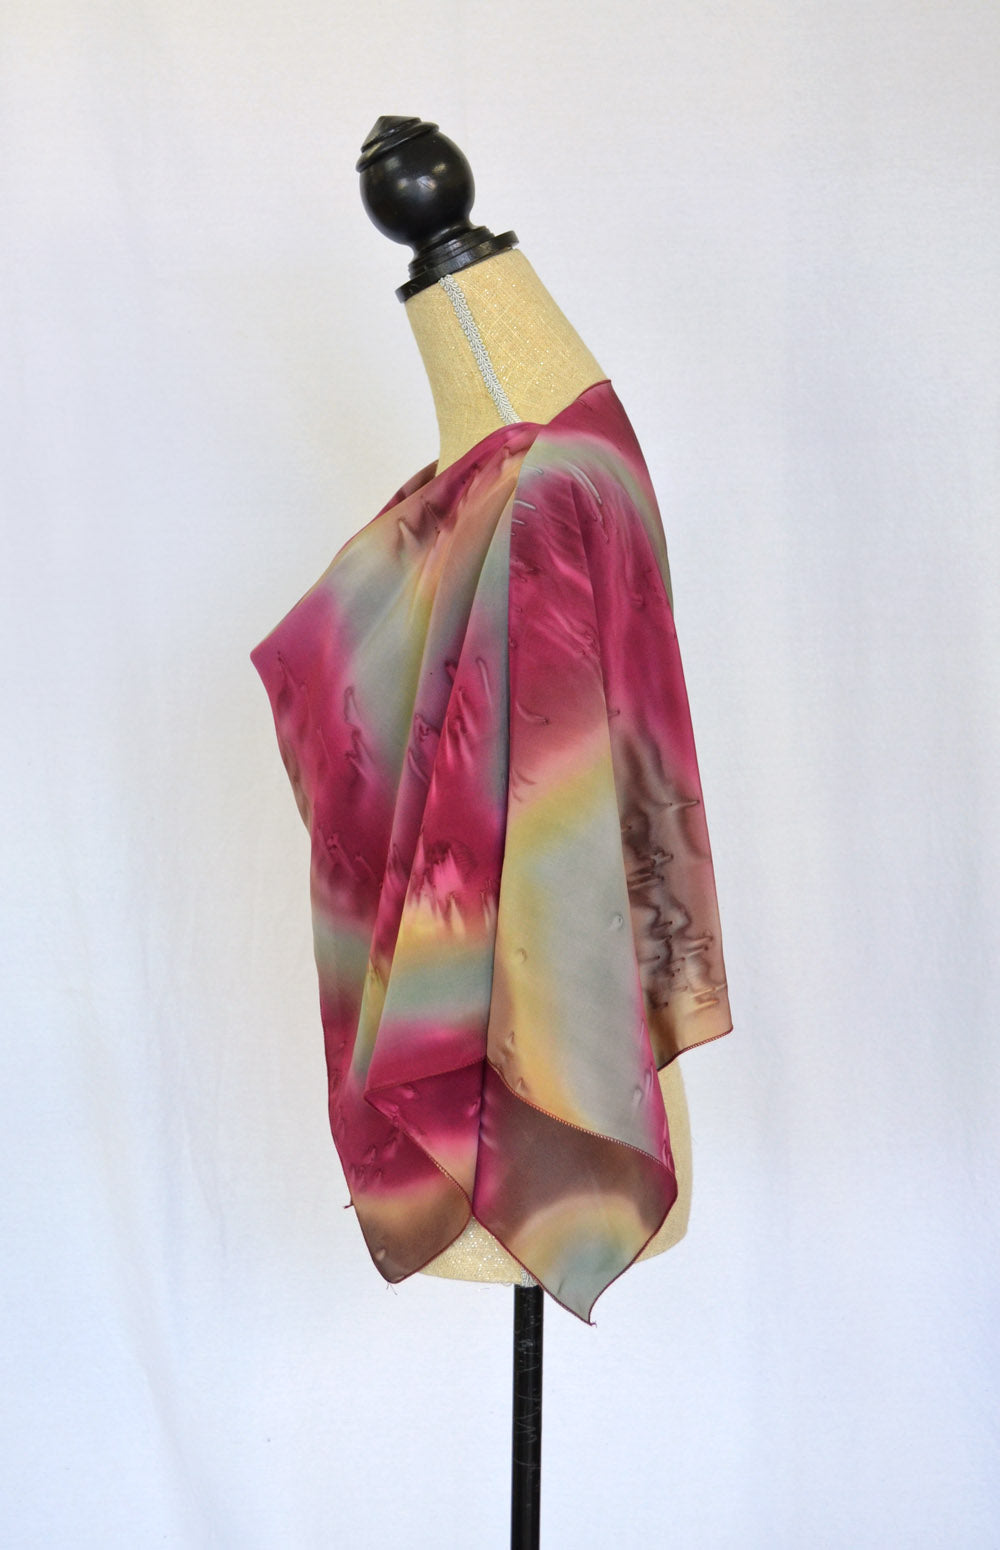 Twisted Crepe de Chine Shawl | Clearance